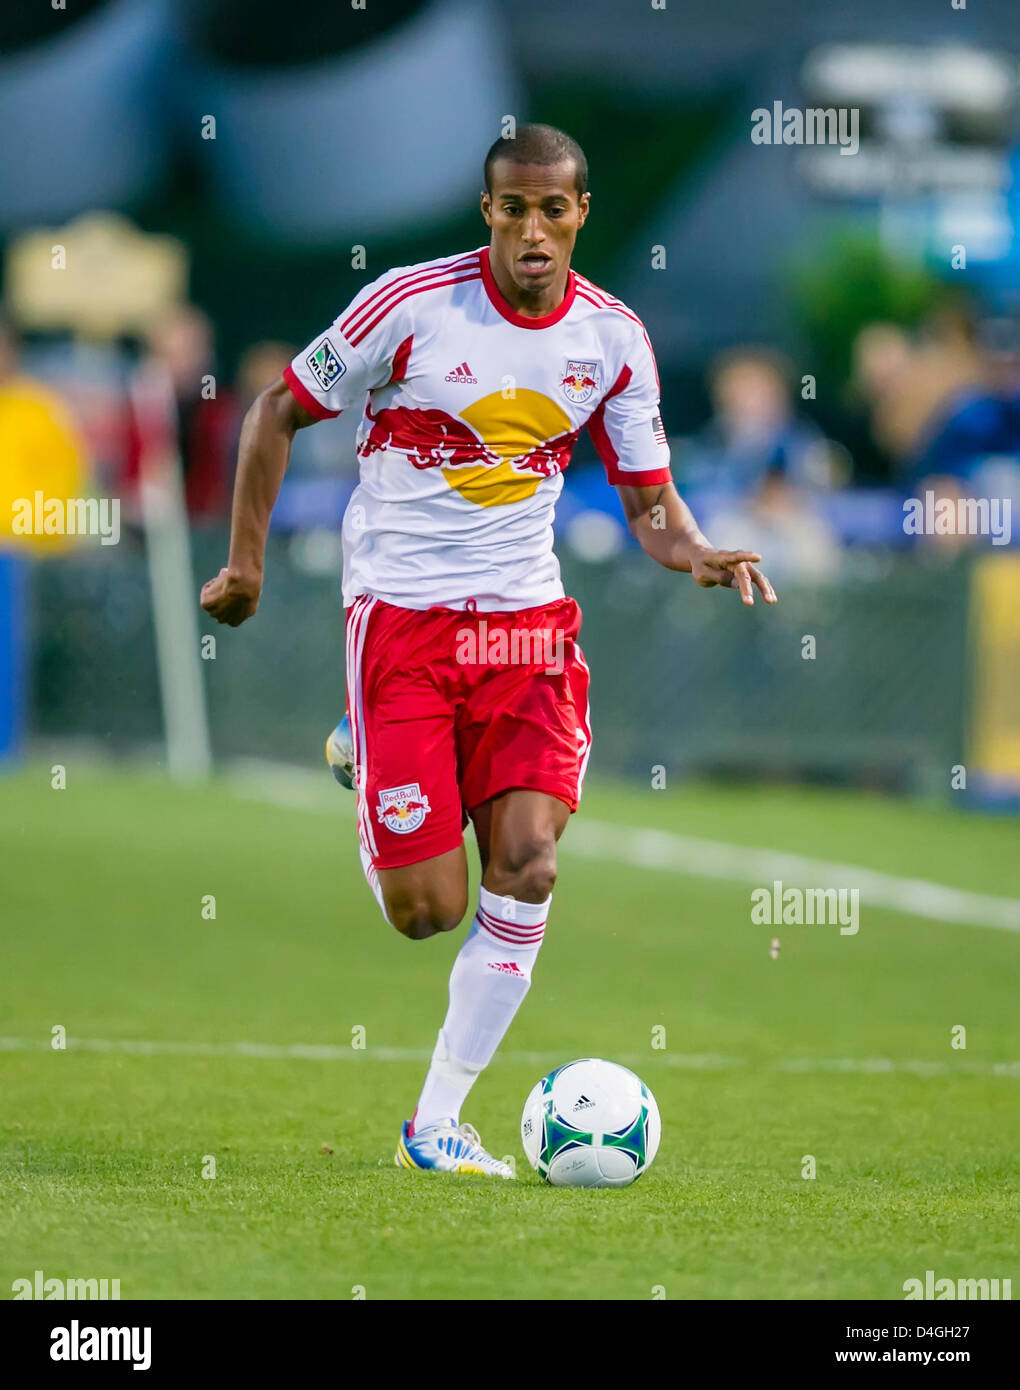 March 10, 2013: New York Red Bulls defender Roy Miller (7) in action during the MLS game between the New York Red Bulls and the San Jose Earthquakes at Buck Shaw Stadium in Santa Clara CA. San Jose defeated New York 2-1. Stock Photo